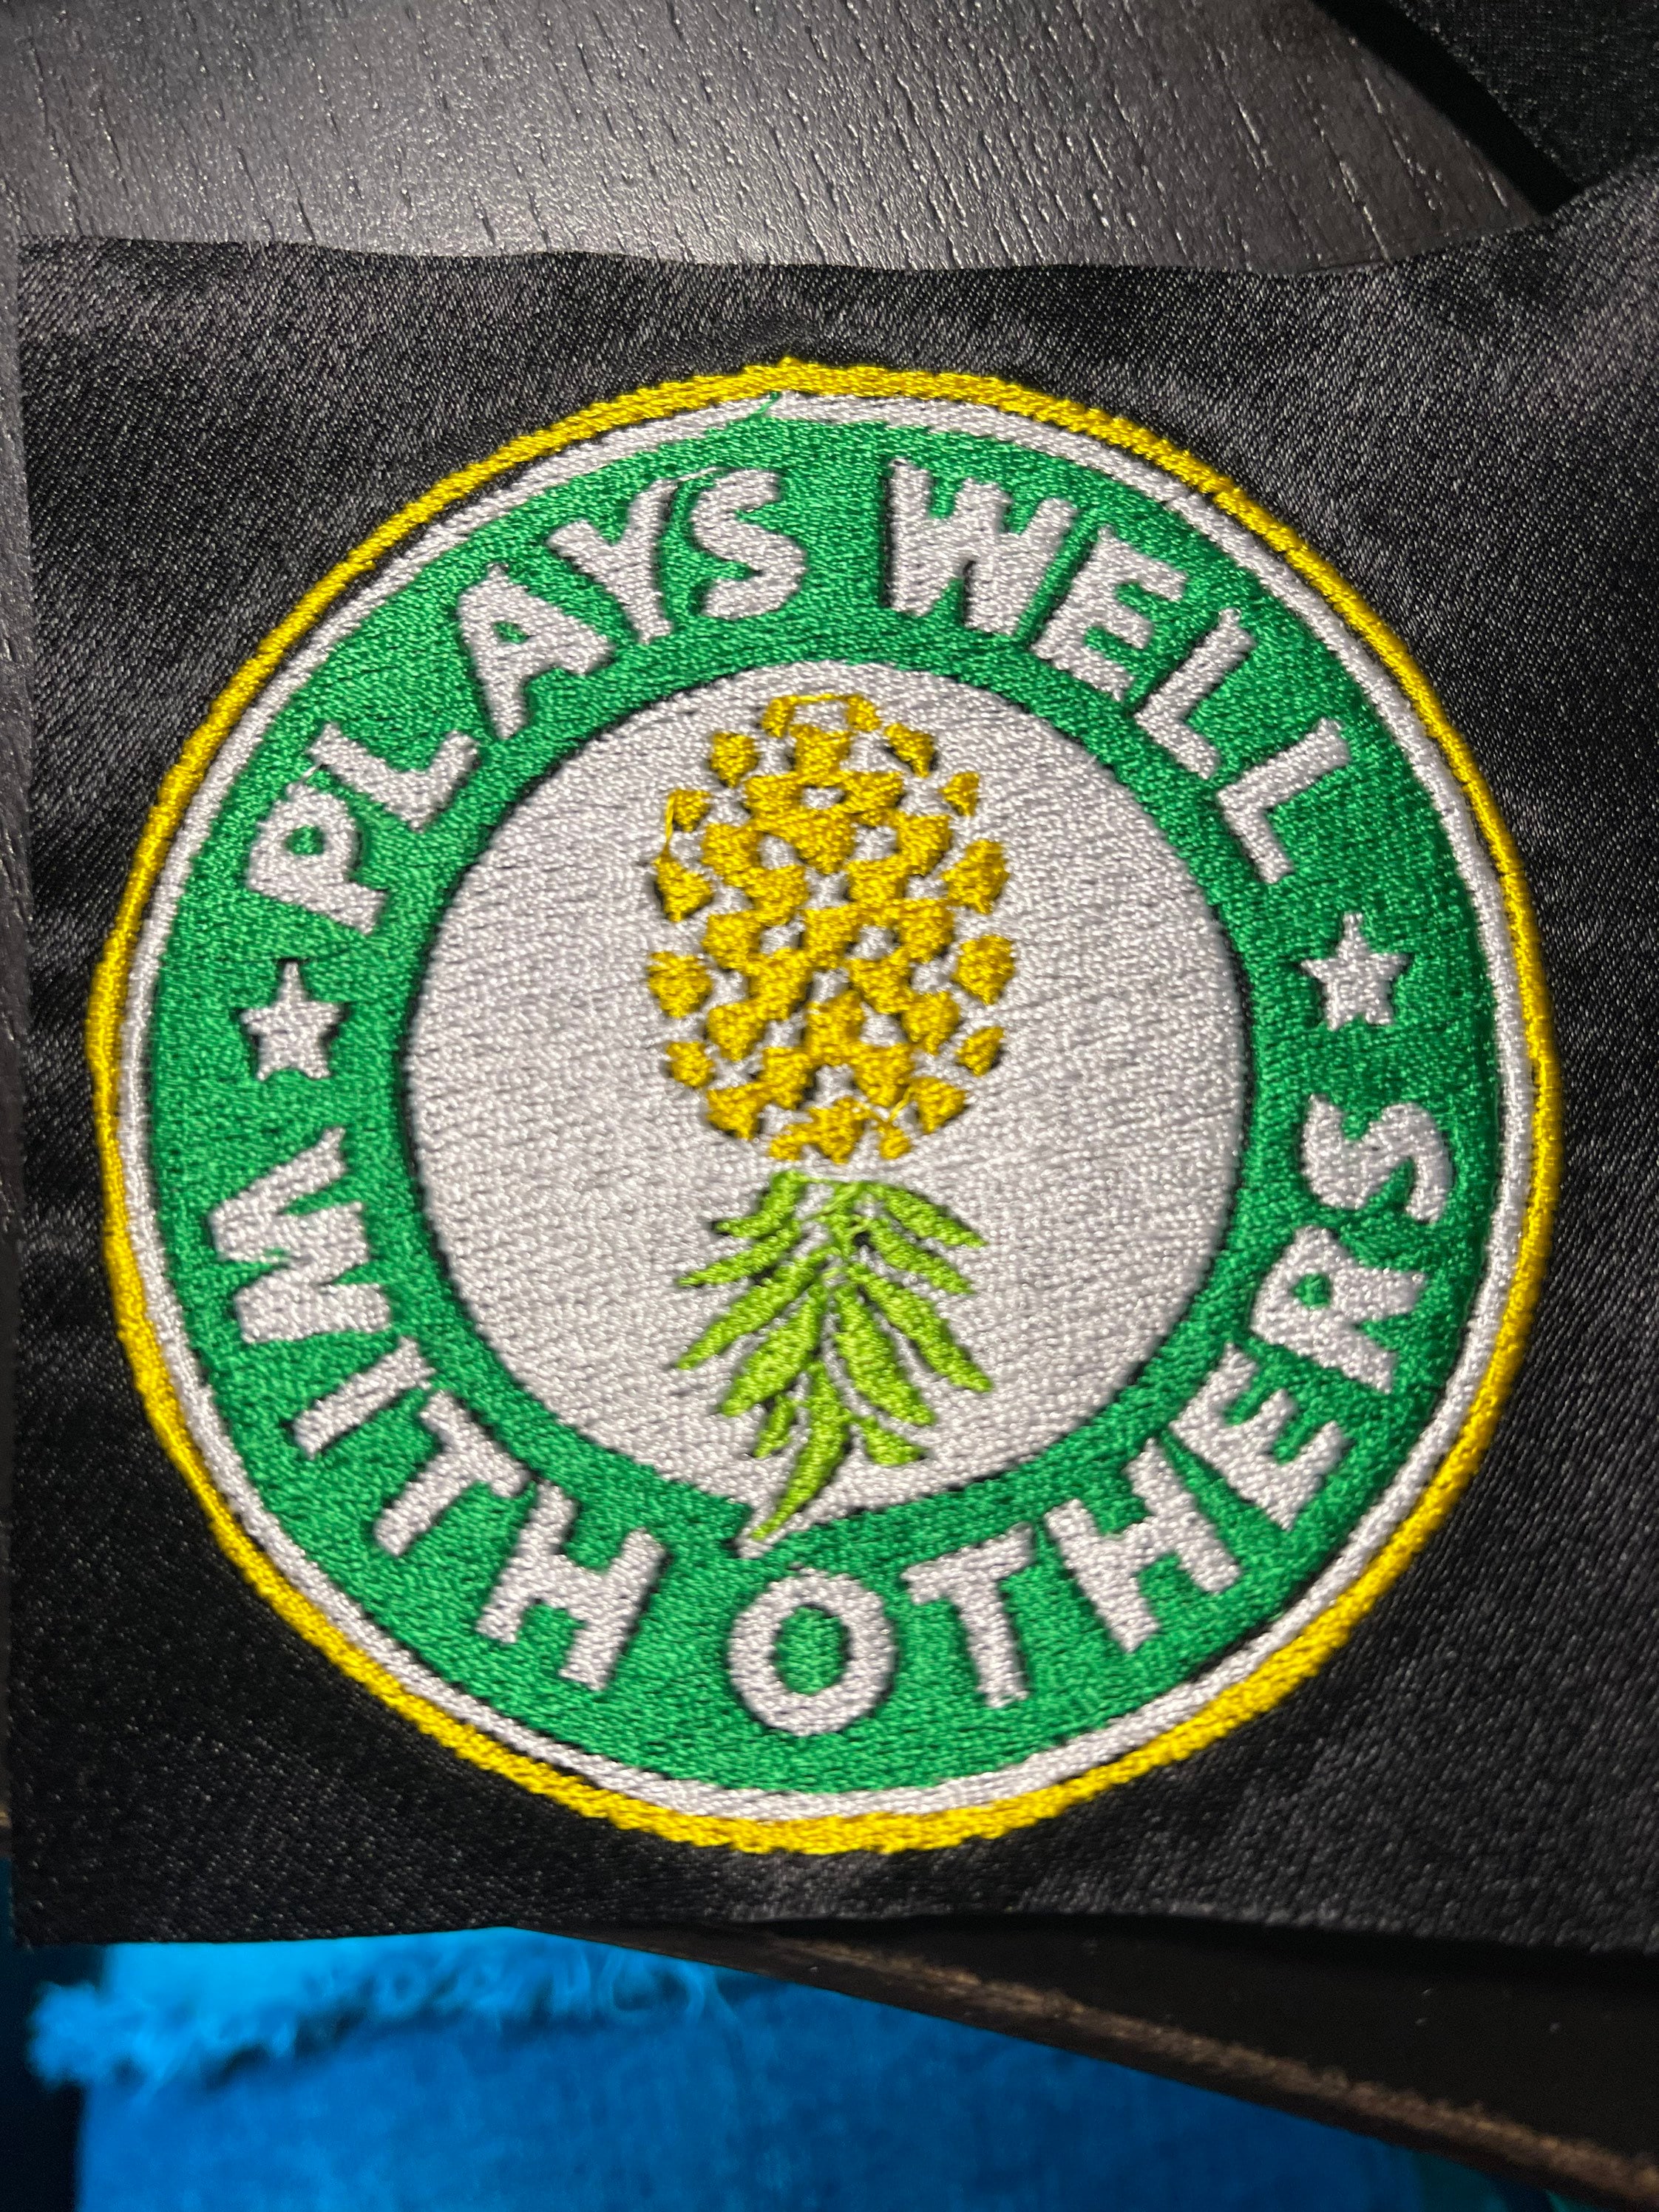 Upside Down Pineapple Swingers Patch Plays Well With Others picture picture